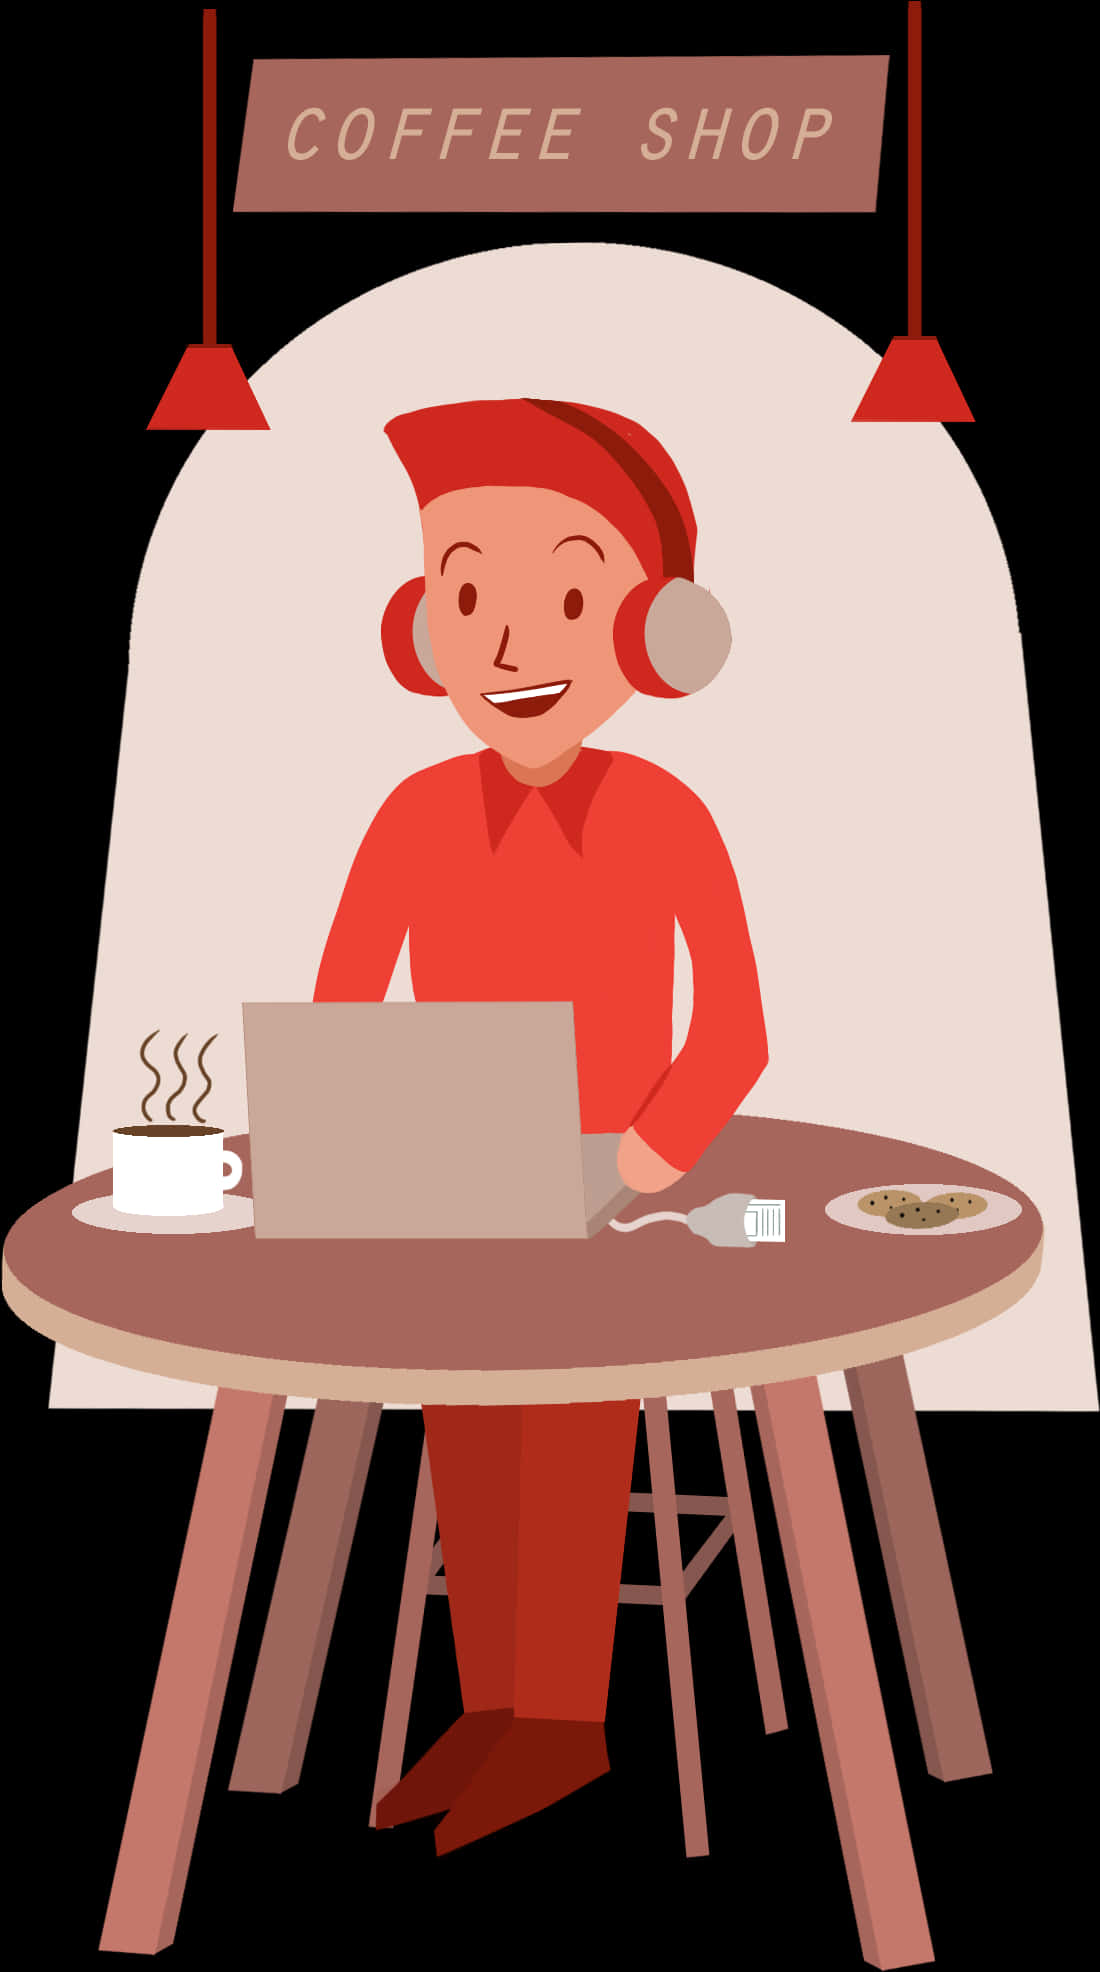 A Cartoon Of A Man Sitting At A Table With A Laptop